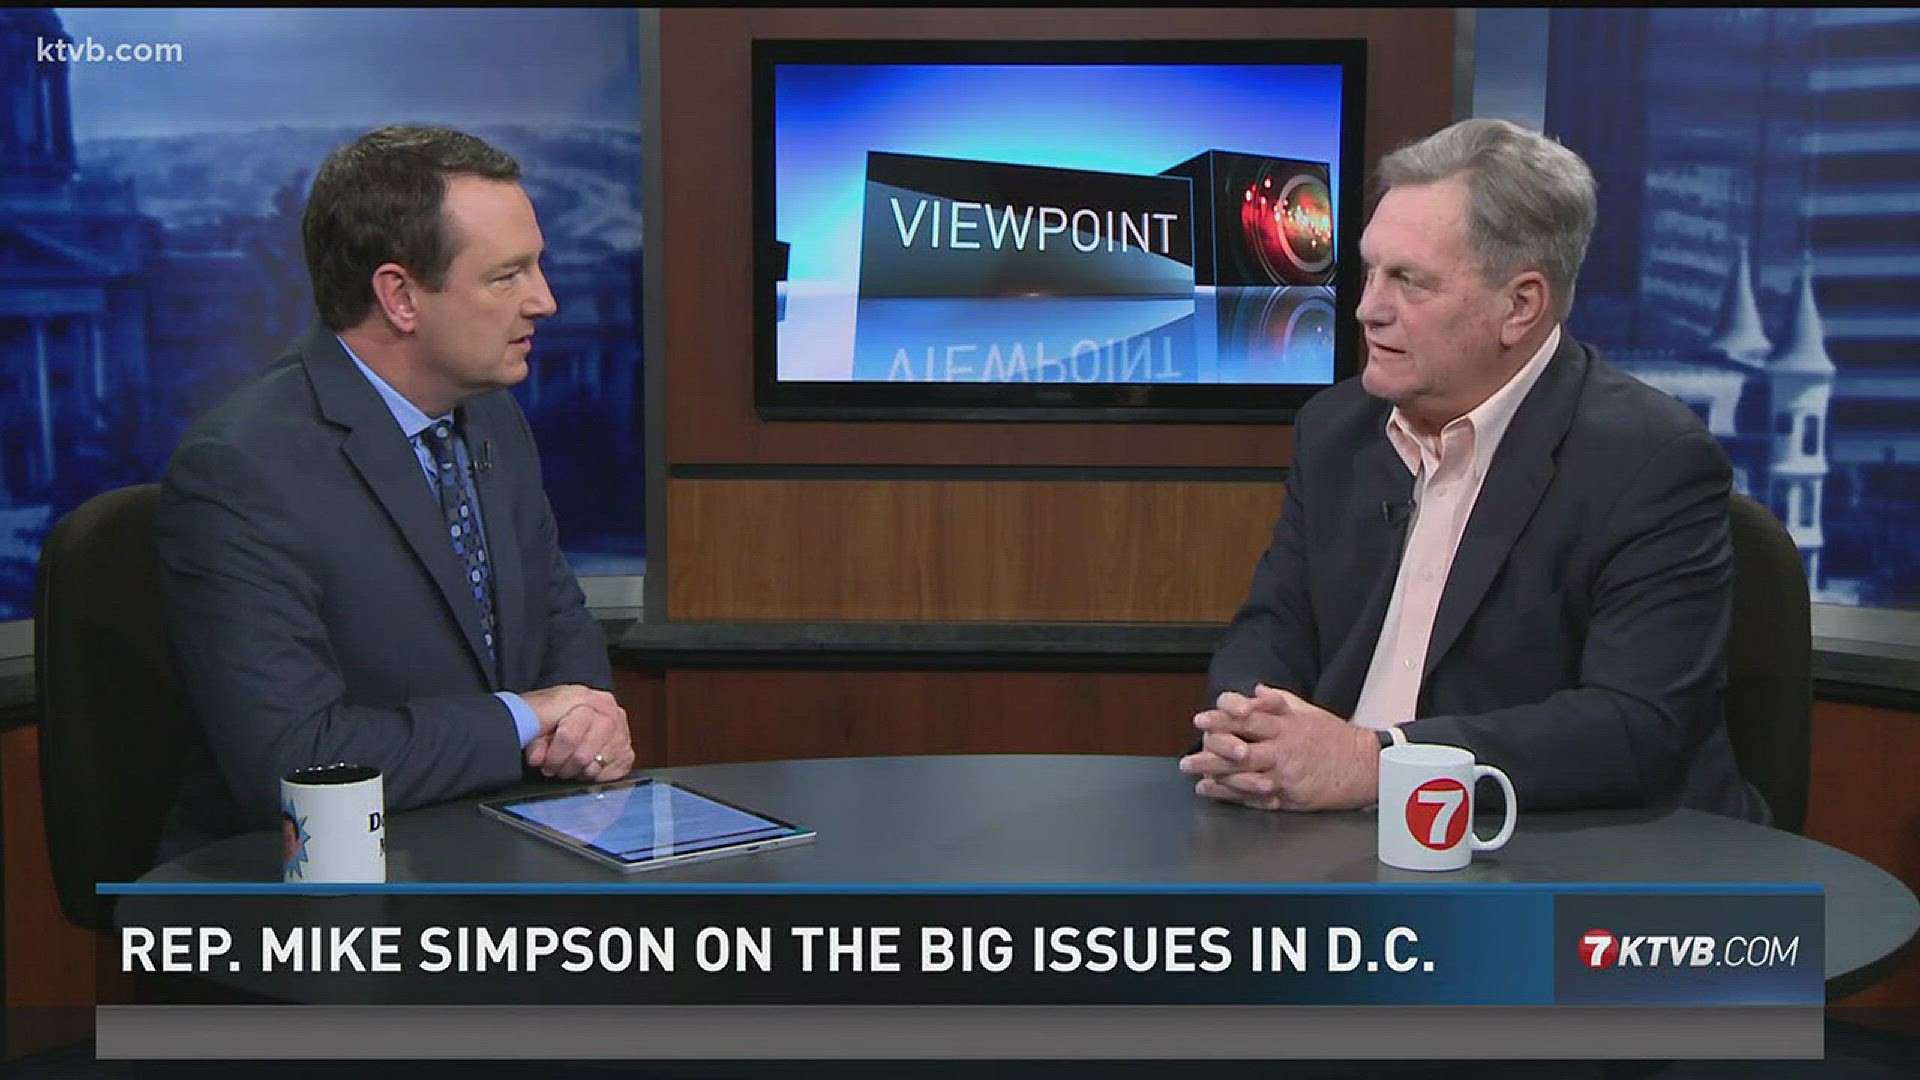 Viewpoint - Rep. Simpson on big issues in D.C.